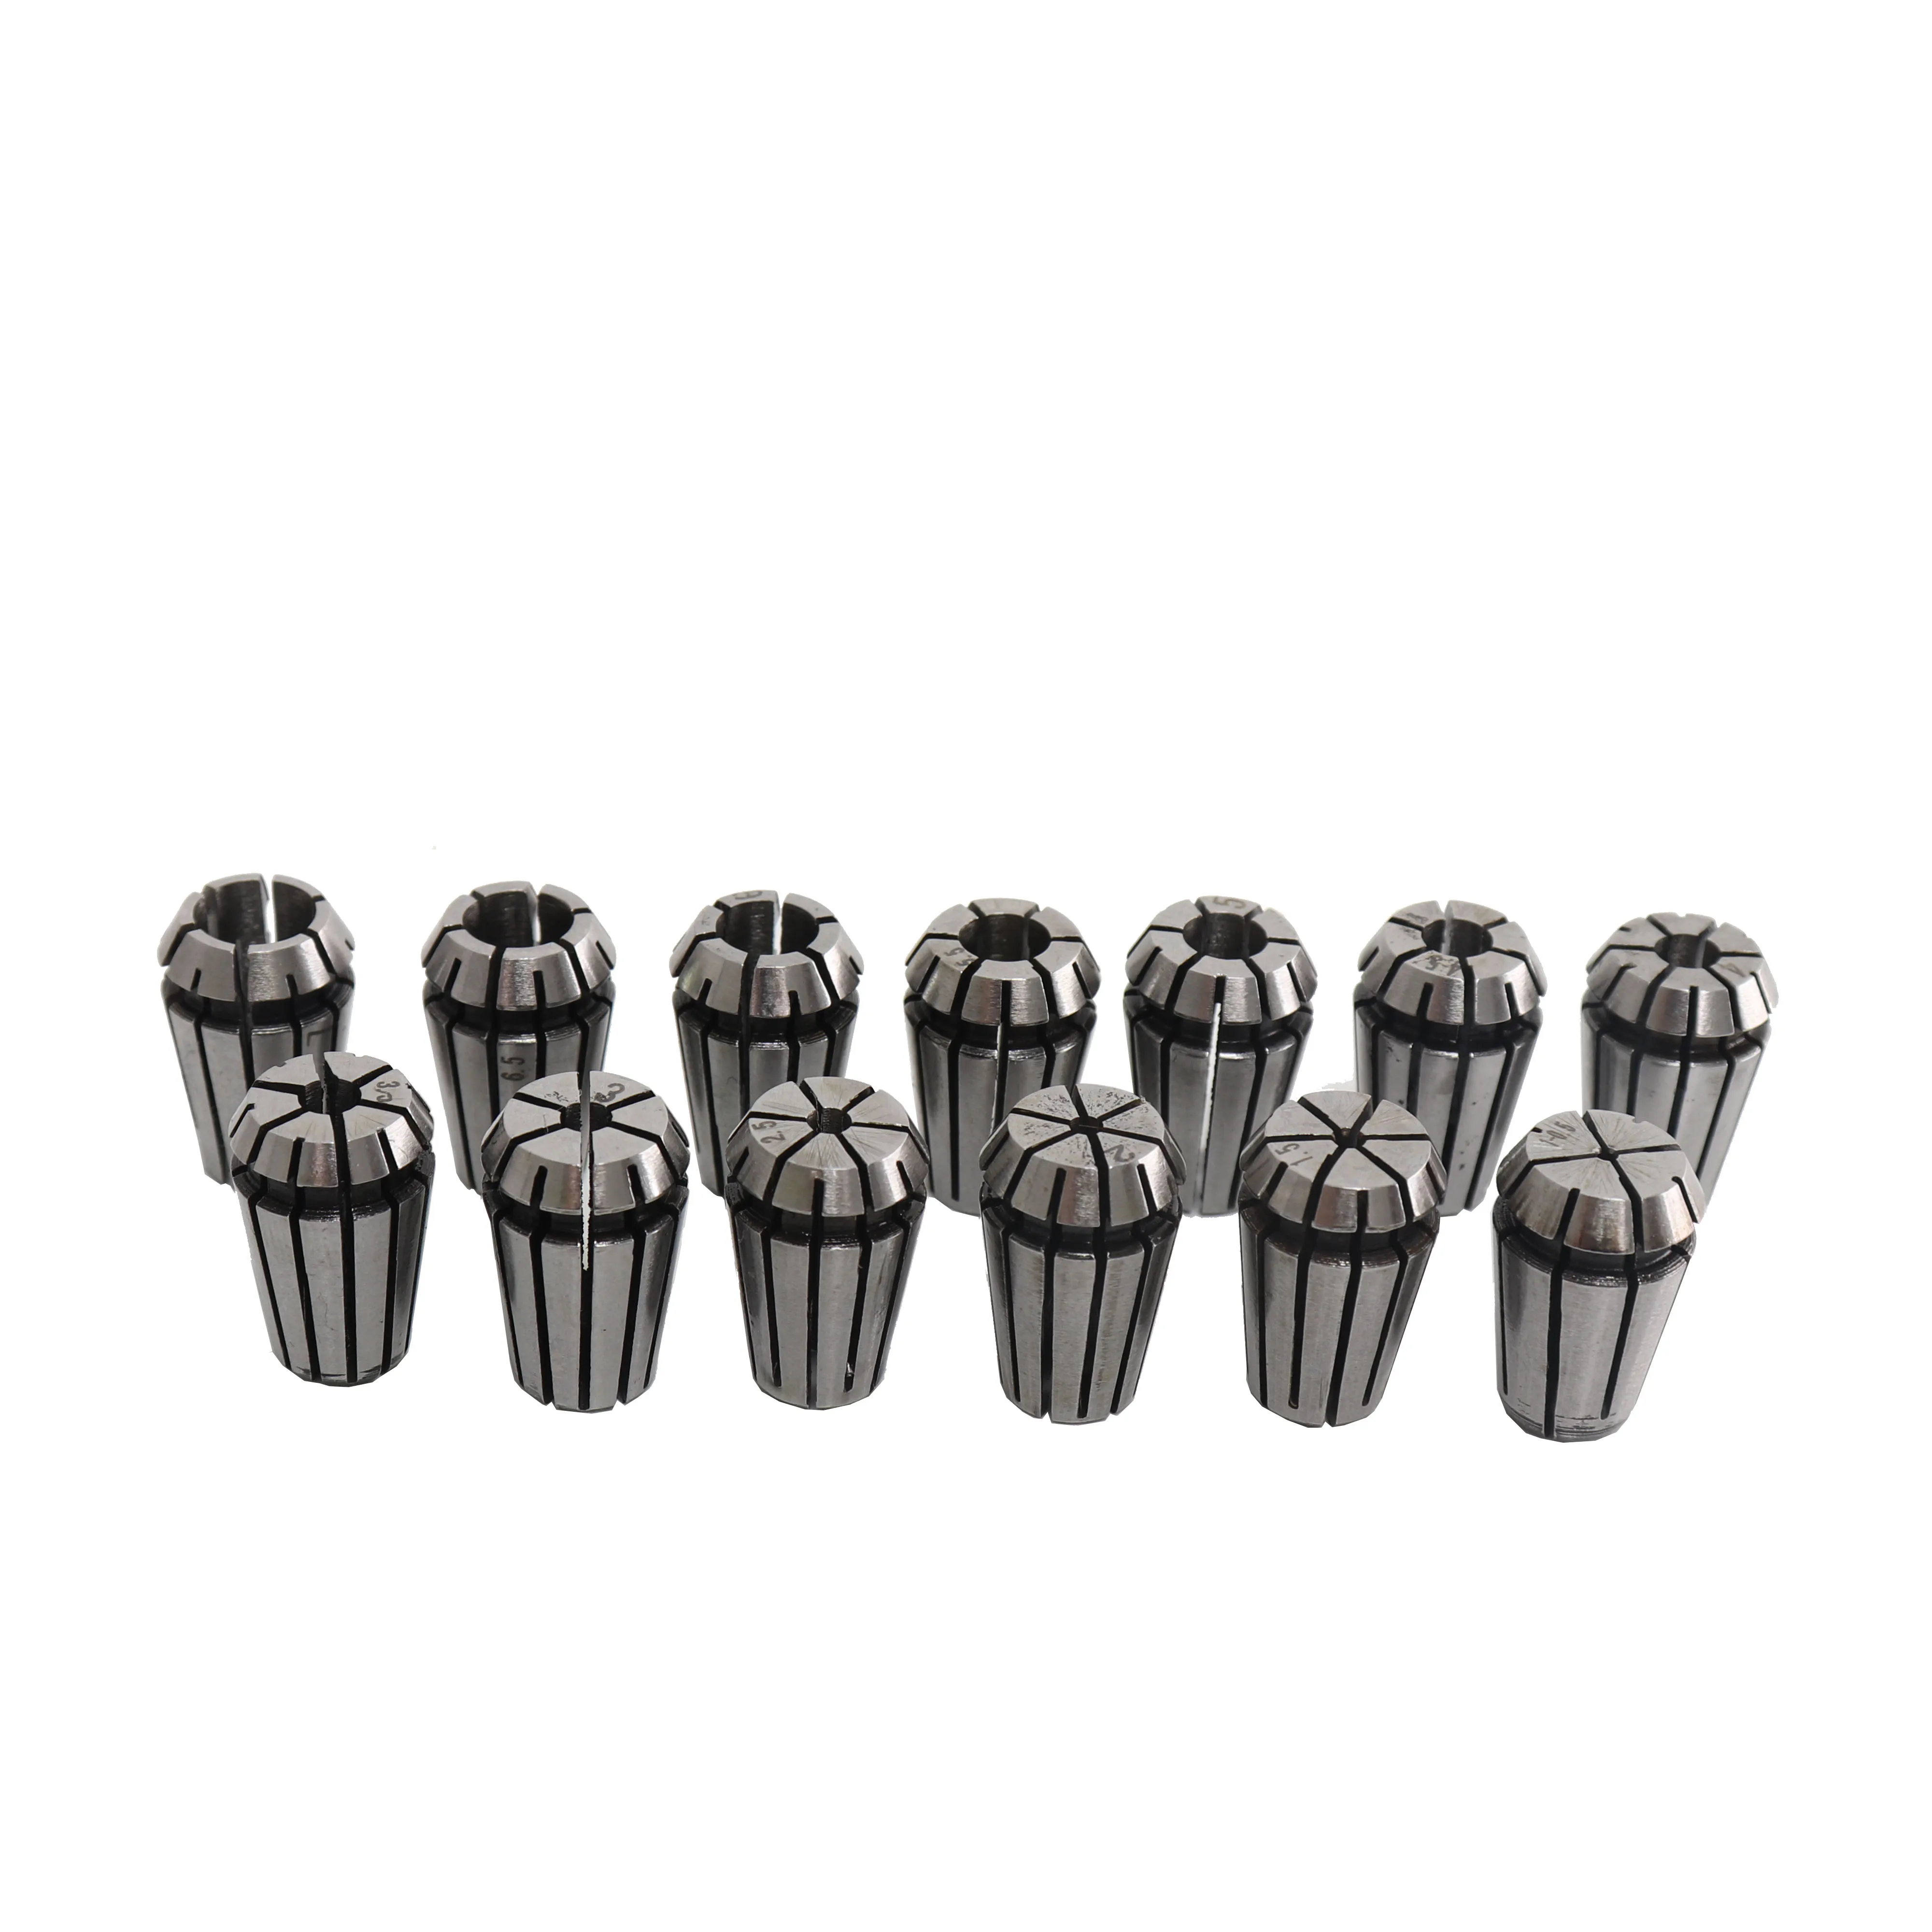 Best prices  ER11 collet set 13 pcs from 1 mm to 7 mm chuck for CNC milling lathe tool and spindle motor